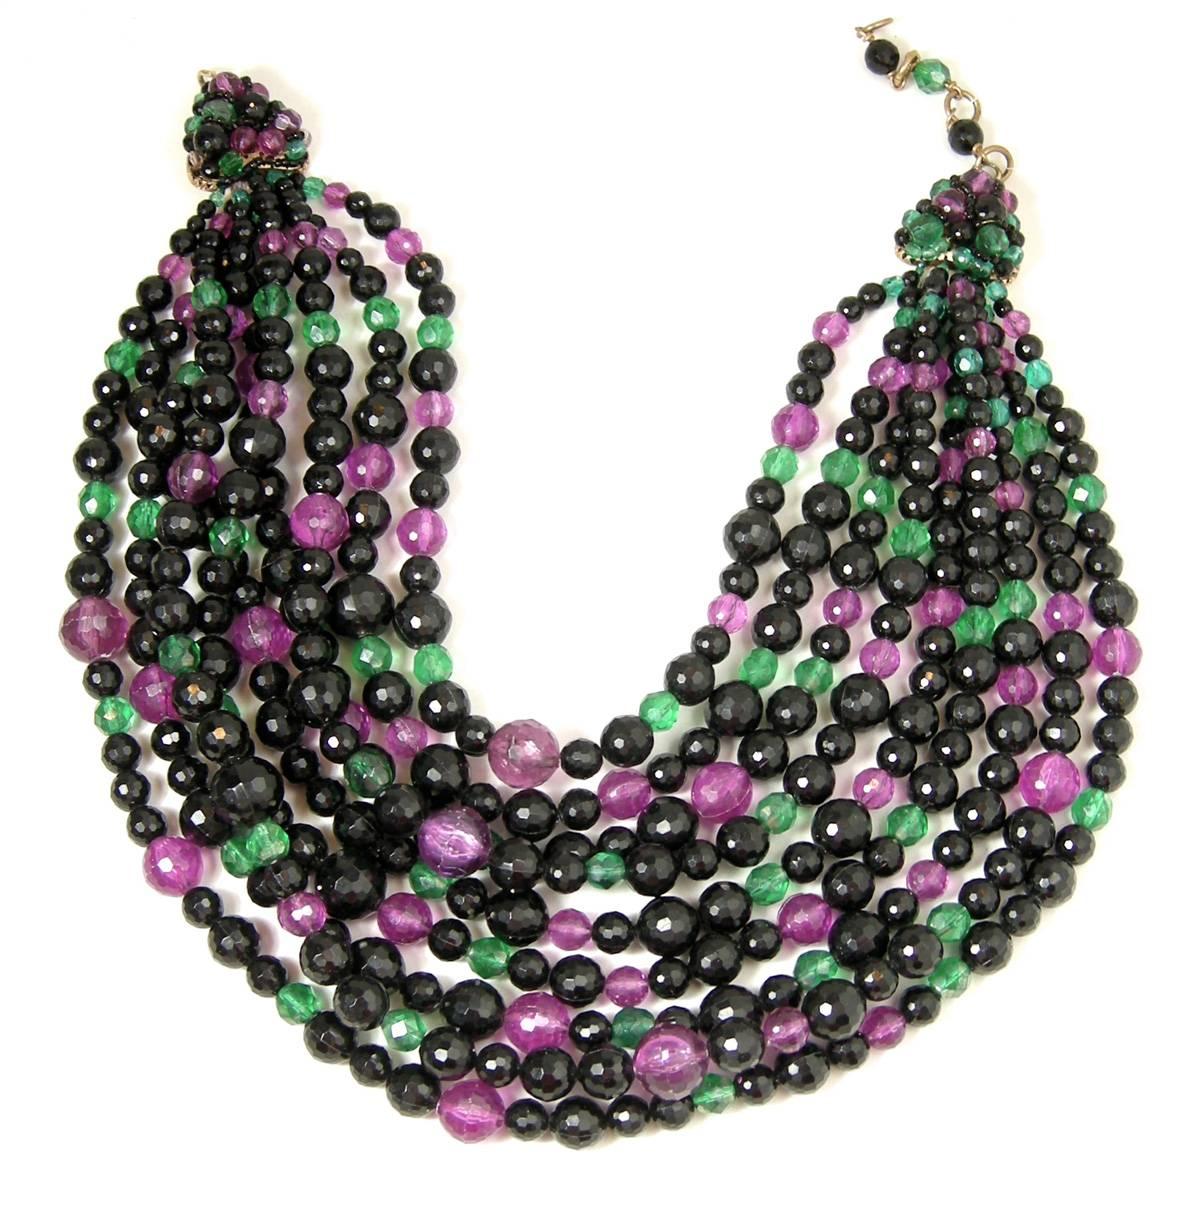 This wonderful vintage 90s 9 strand necklace by Coppola e Toppo has a multitude of colors of black, purple and green faceted Lucite beads.  Each end has Coppola’s famous beaded heart beads. The necklace is 17-1/2” and the front is 3-1/2” long and